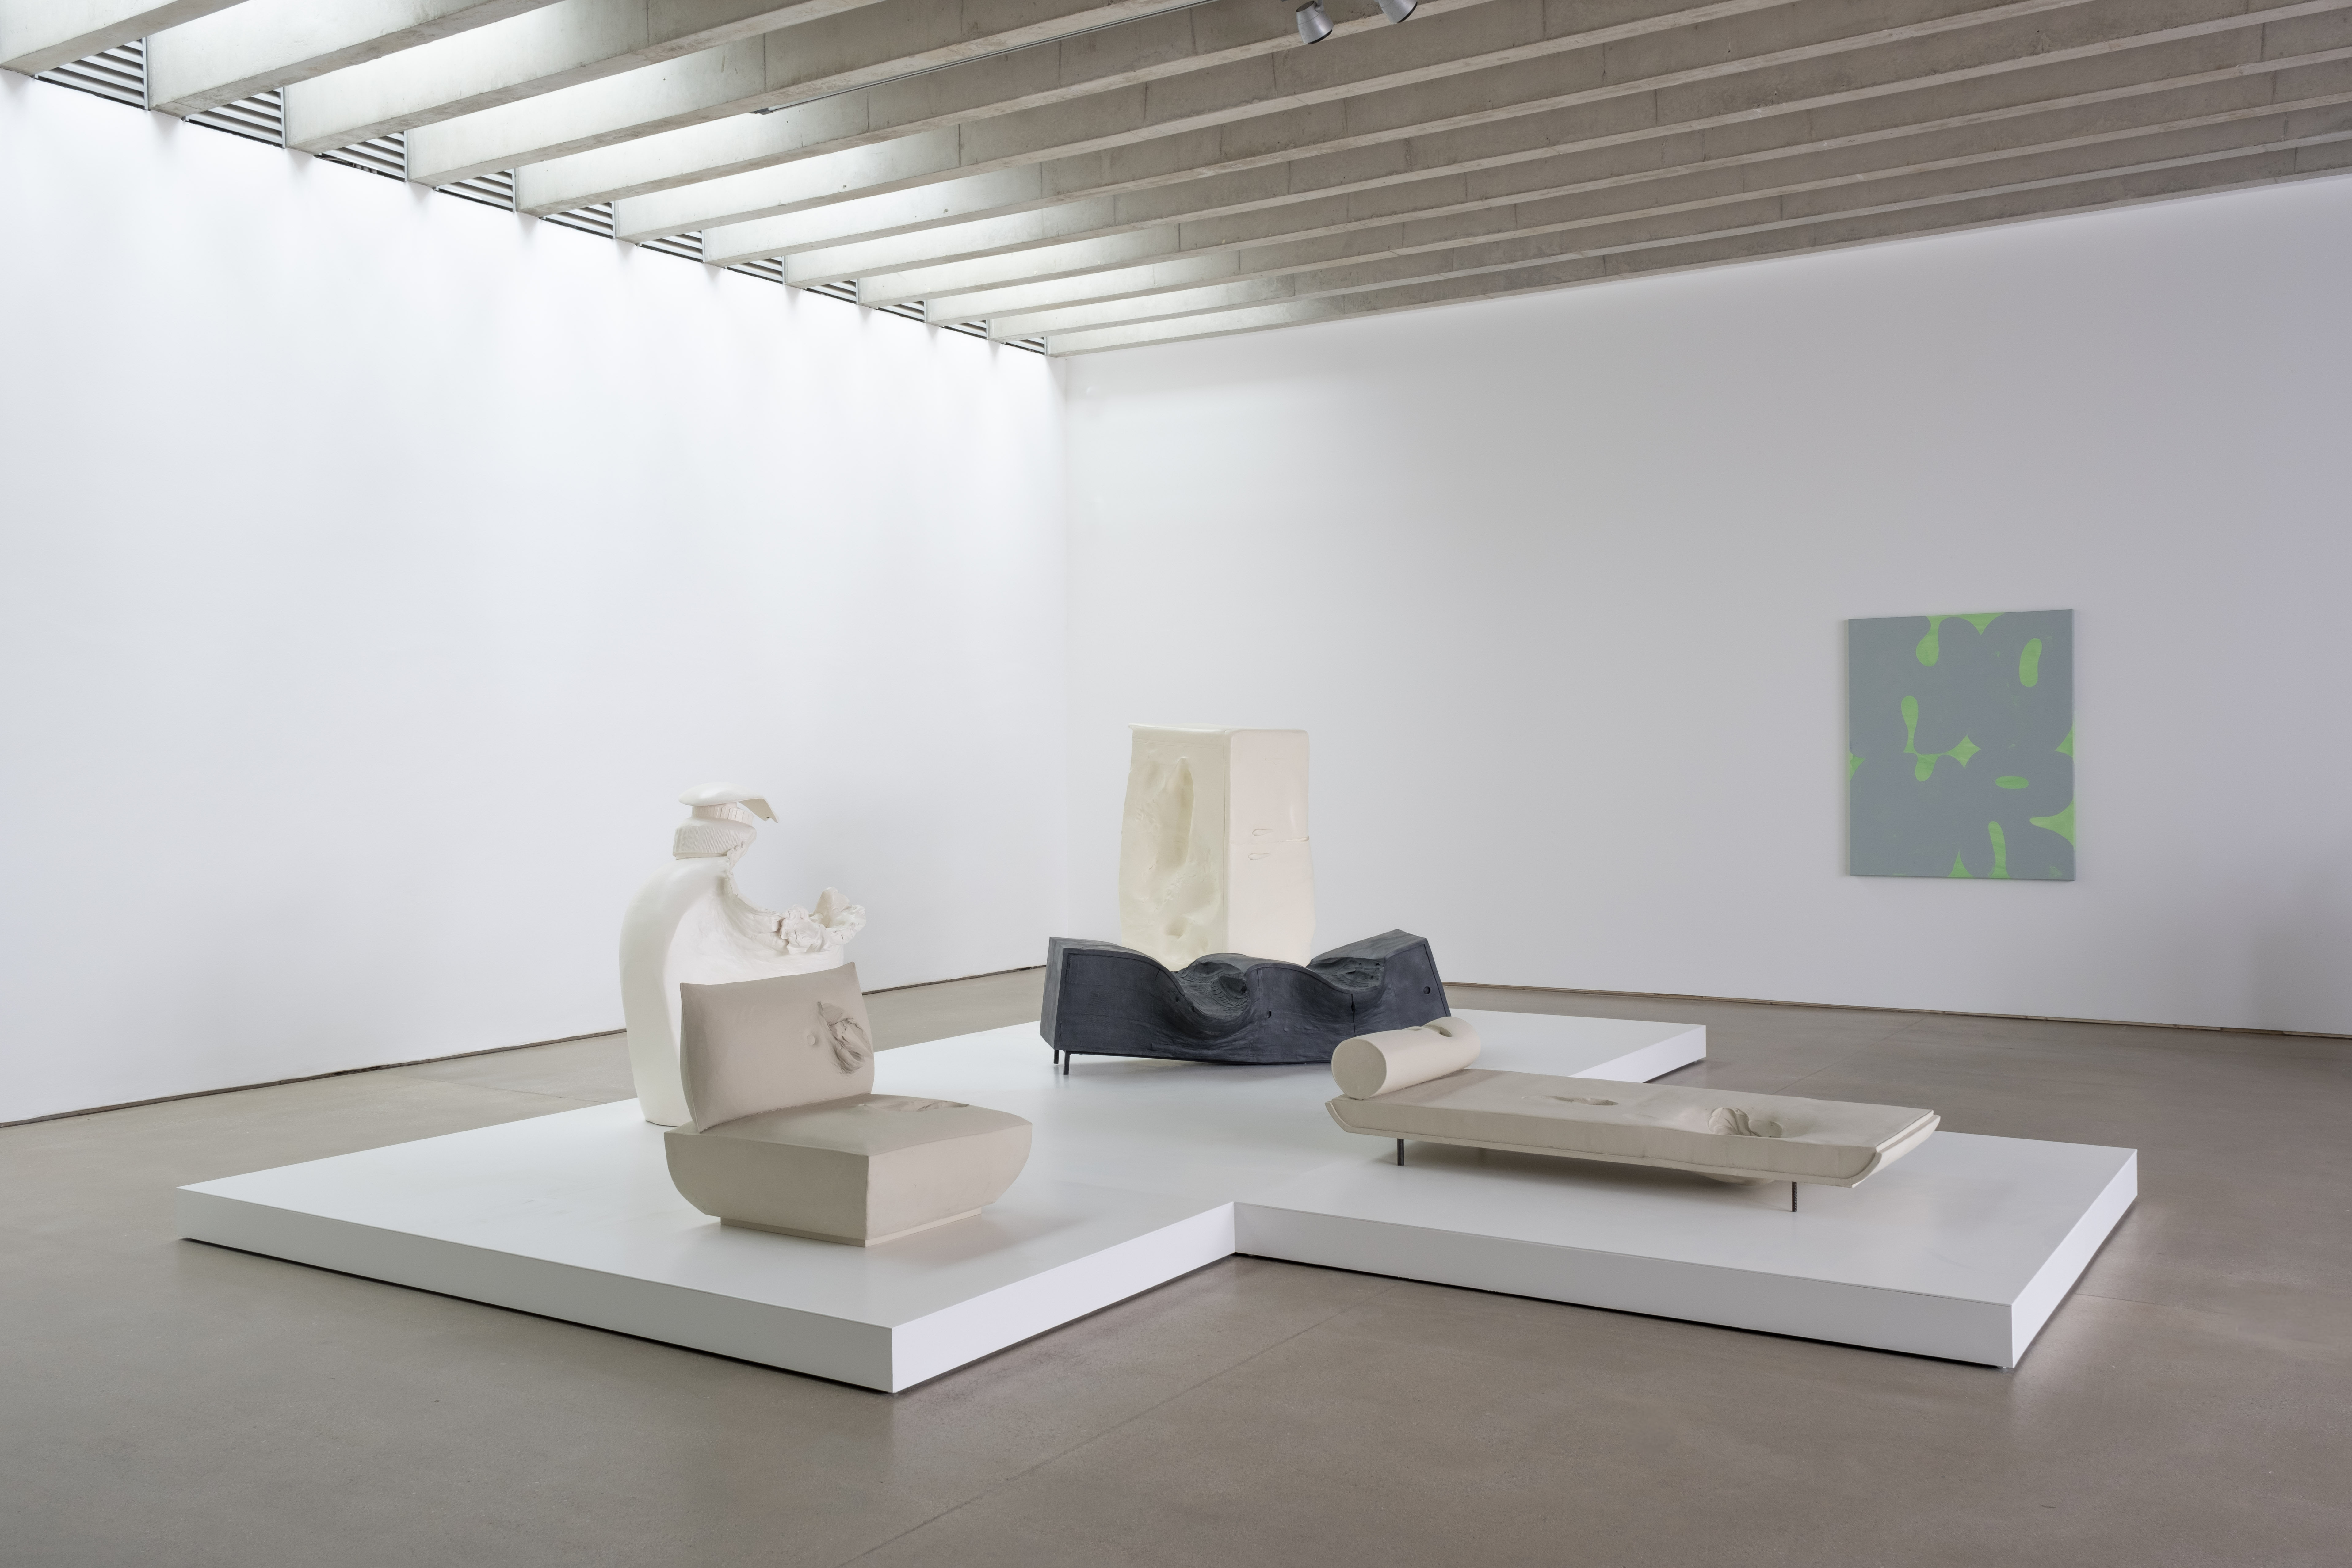 Five sculptures on a white plinth in a gallery and a canvas hung on the wall.